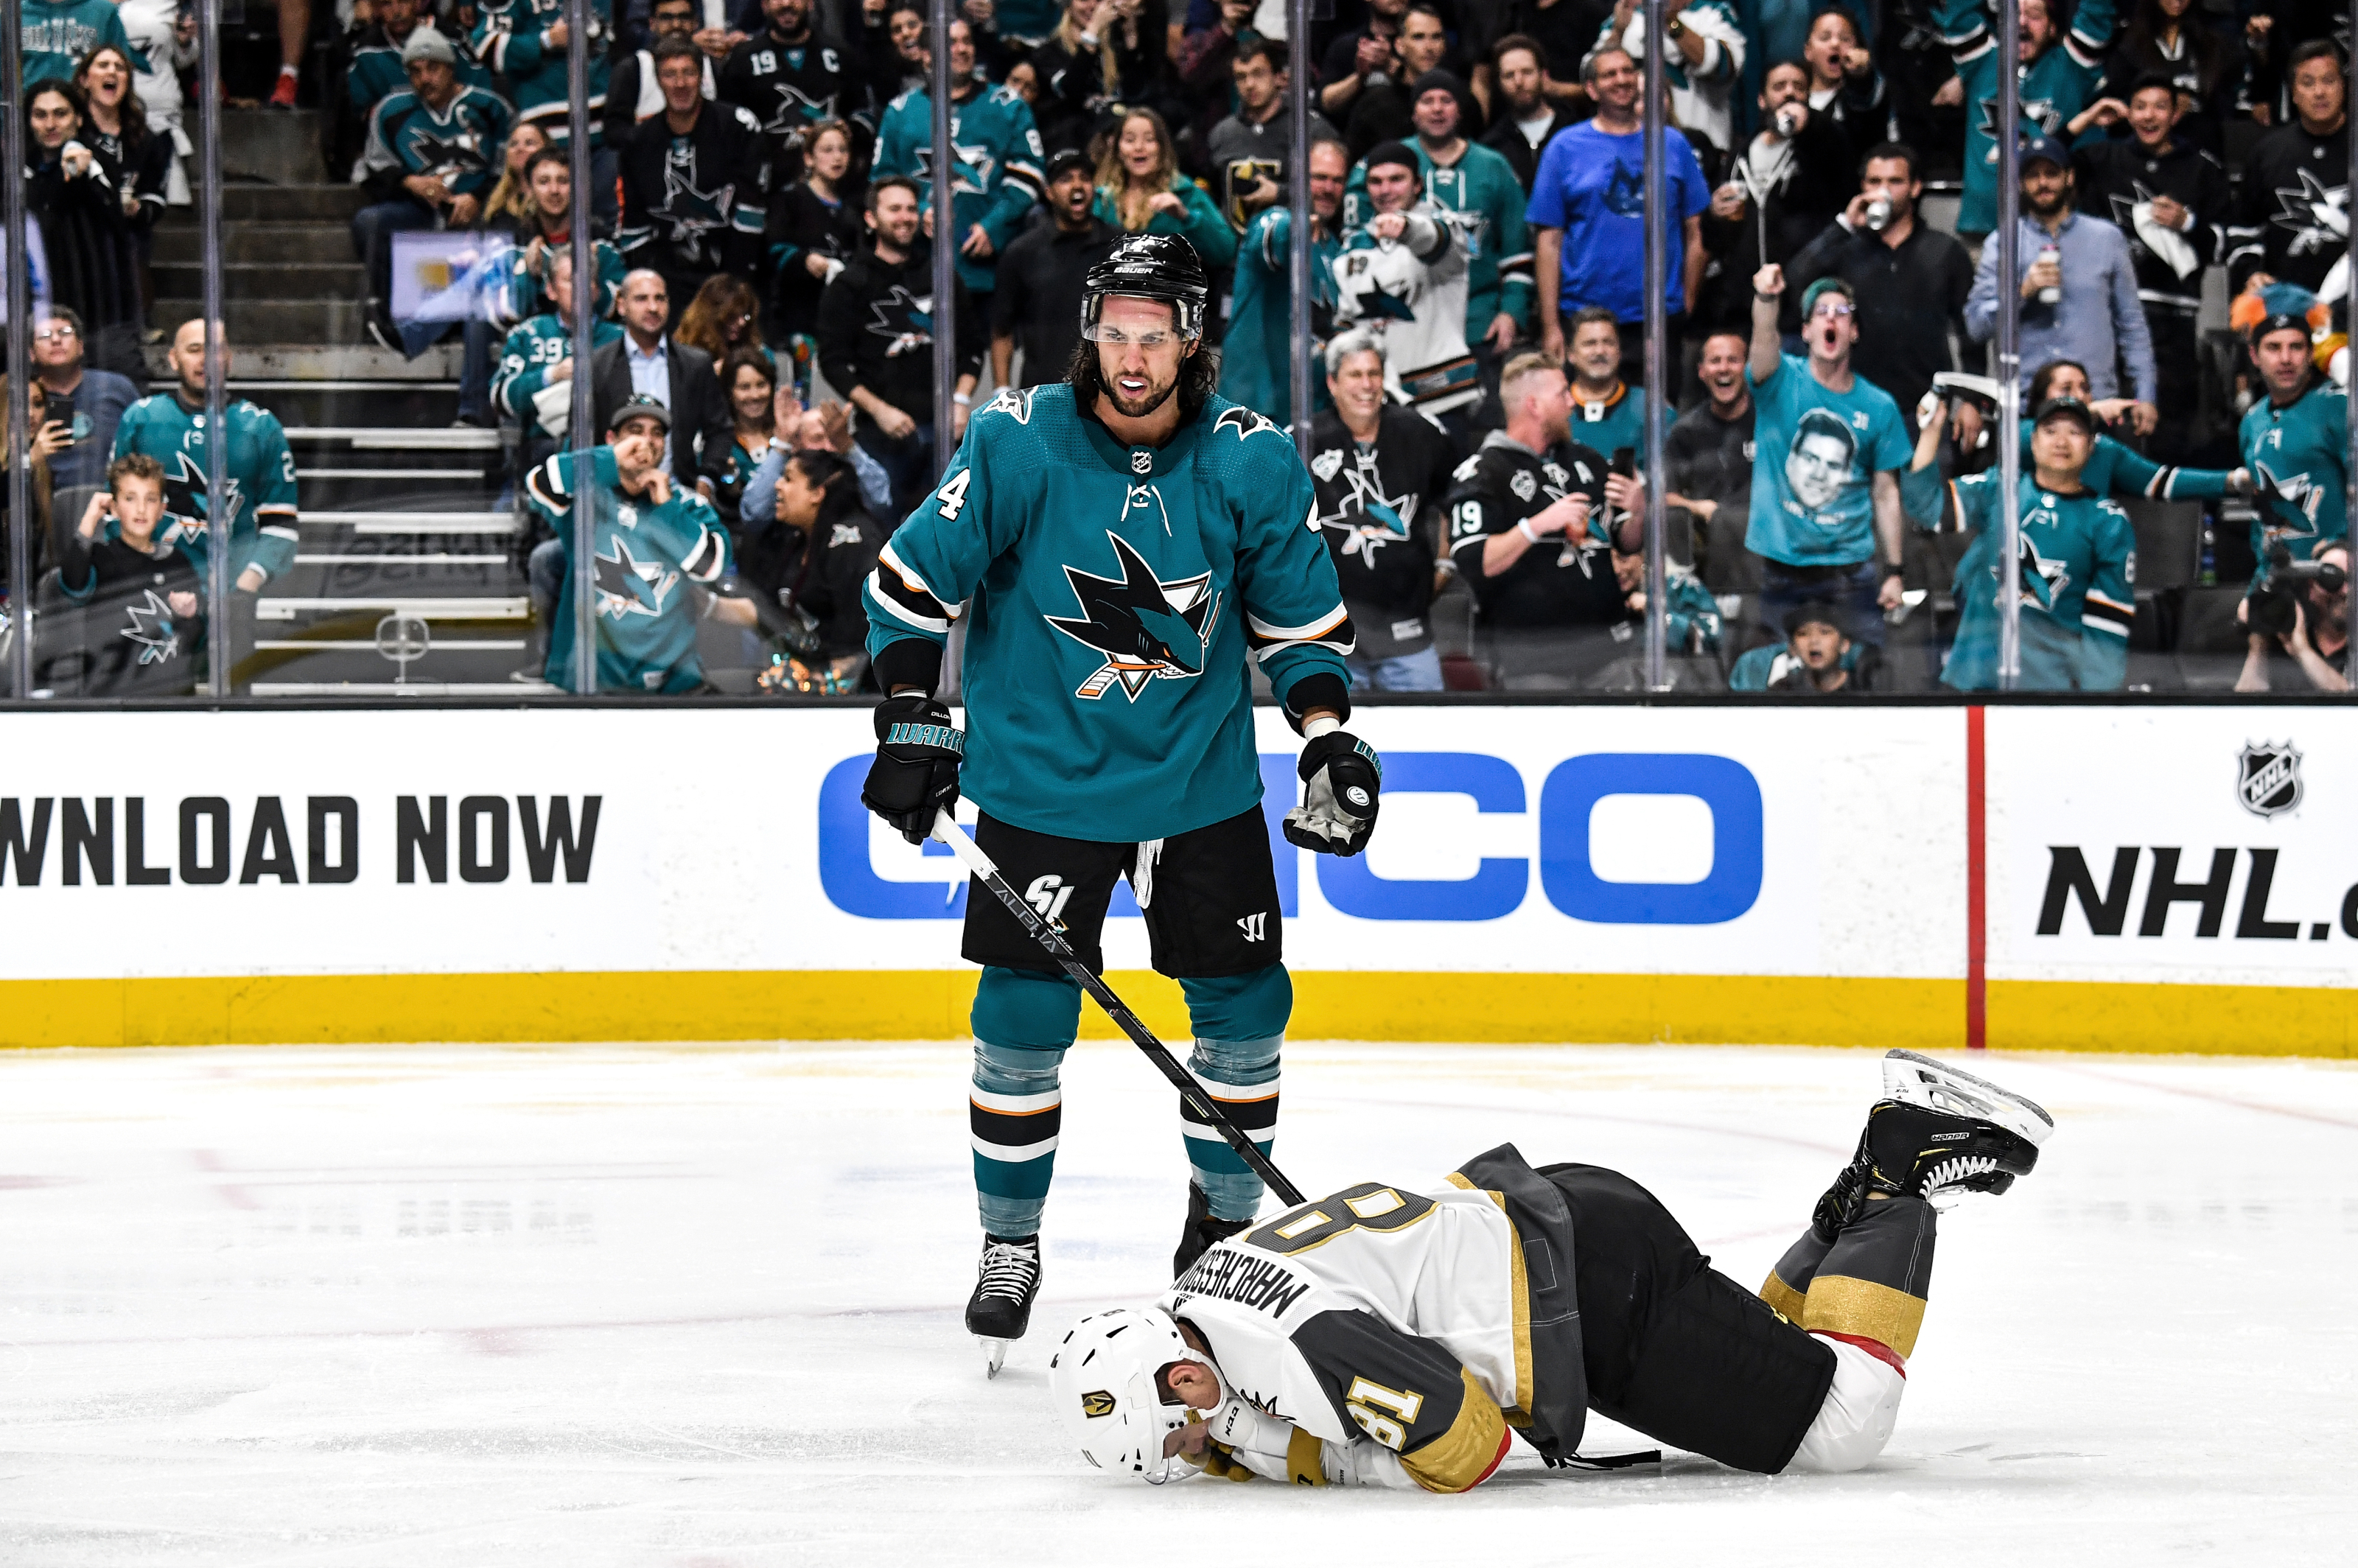 NHL: Sharks' Joe Thornton's hit on Tomas Nosek could be reviewed